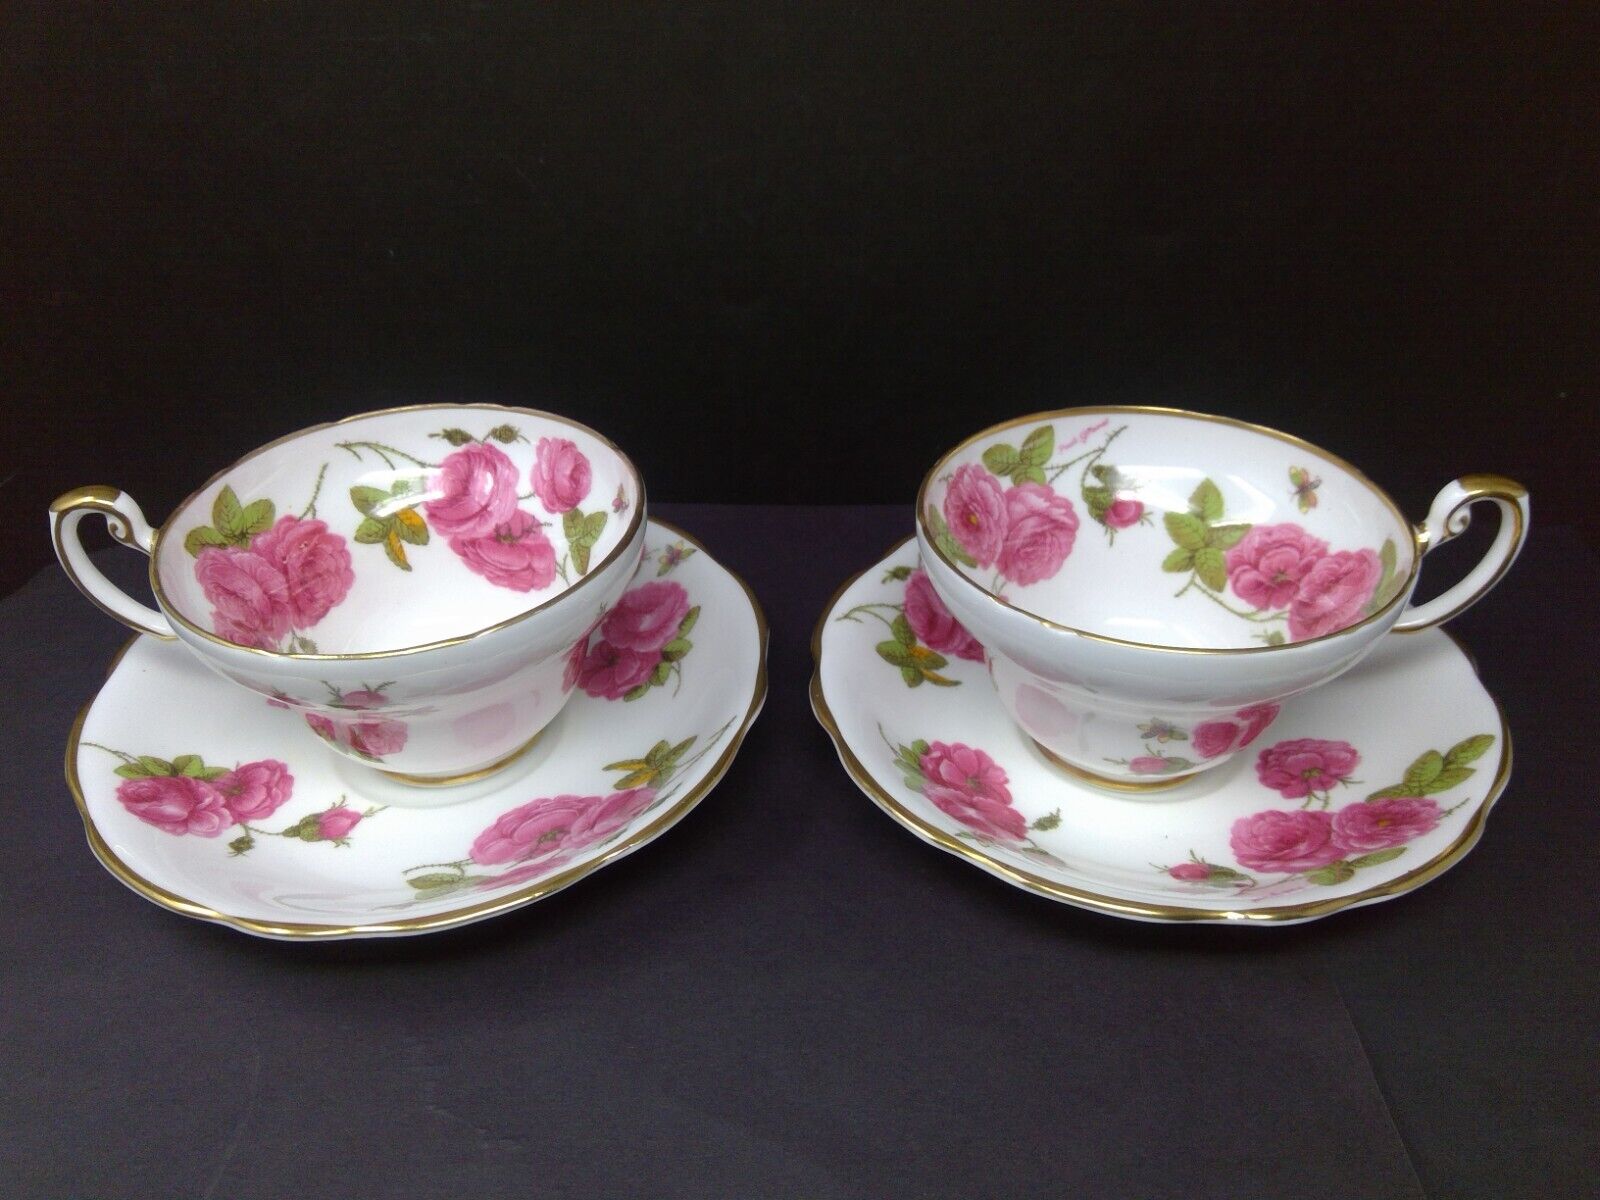 Pair of Foley Bone China Century Rose Cup and Saucer Sets